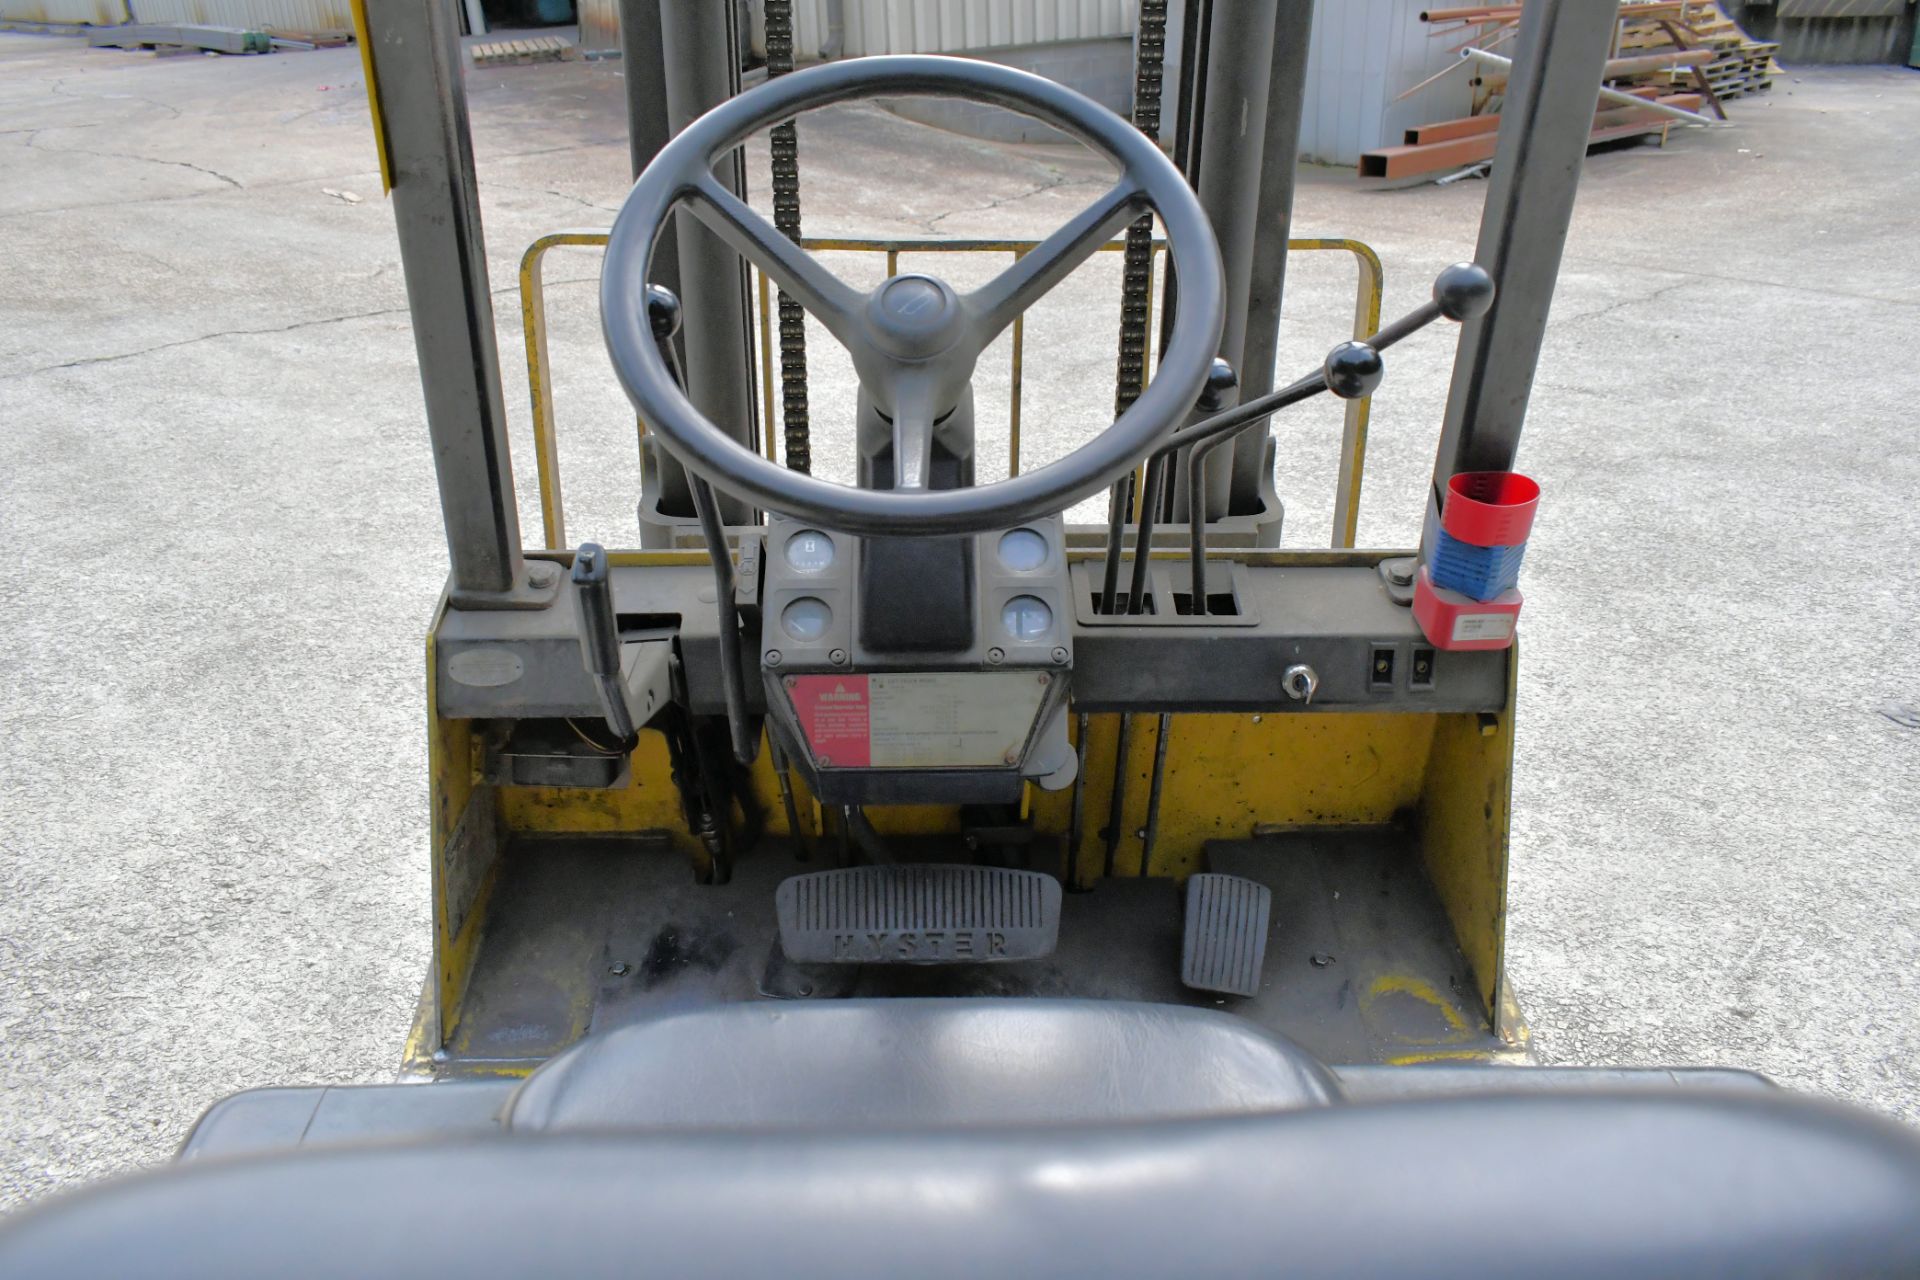 Hyster Model 550XL, 5,600-Lbs. x 131" Lift Capacity LP Gas Fork Lift Truck, S/n C187V10018R, 2-Stage - Image 4 of 7